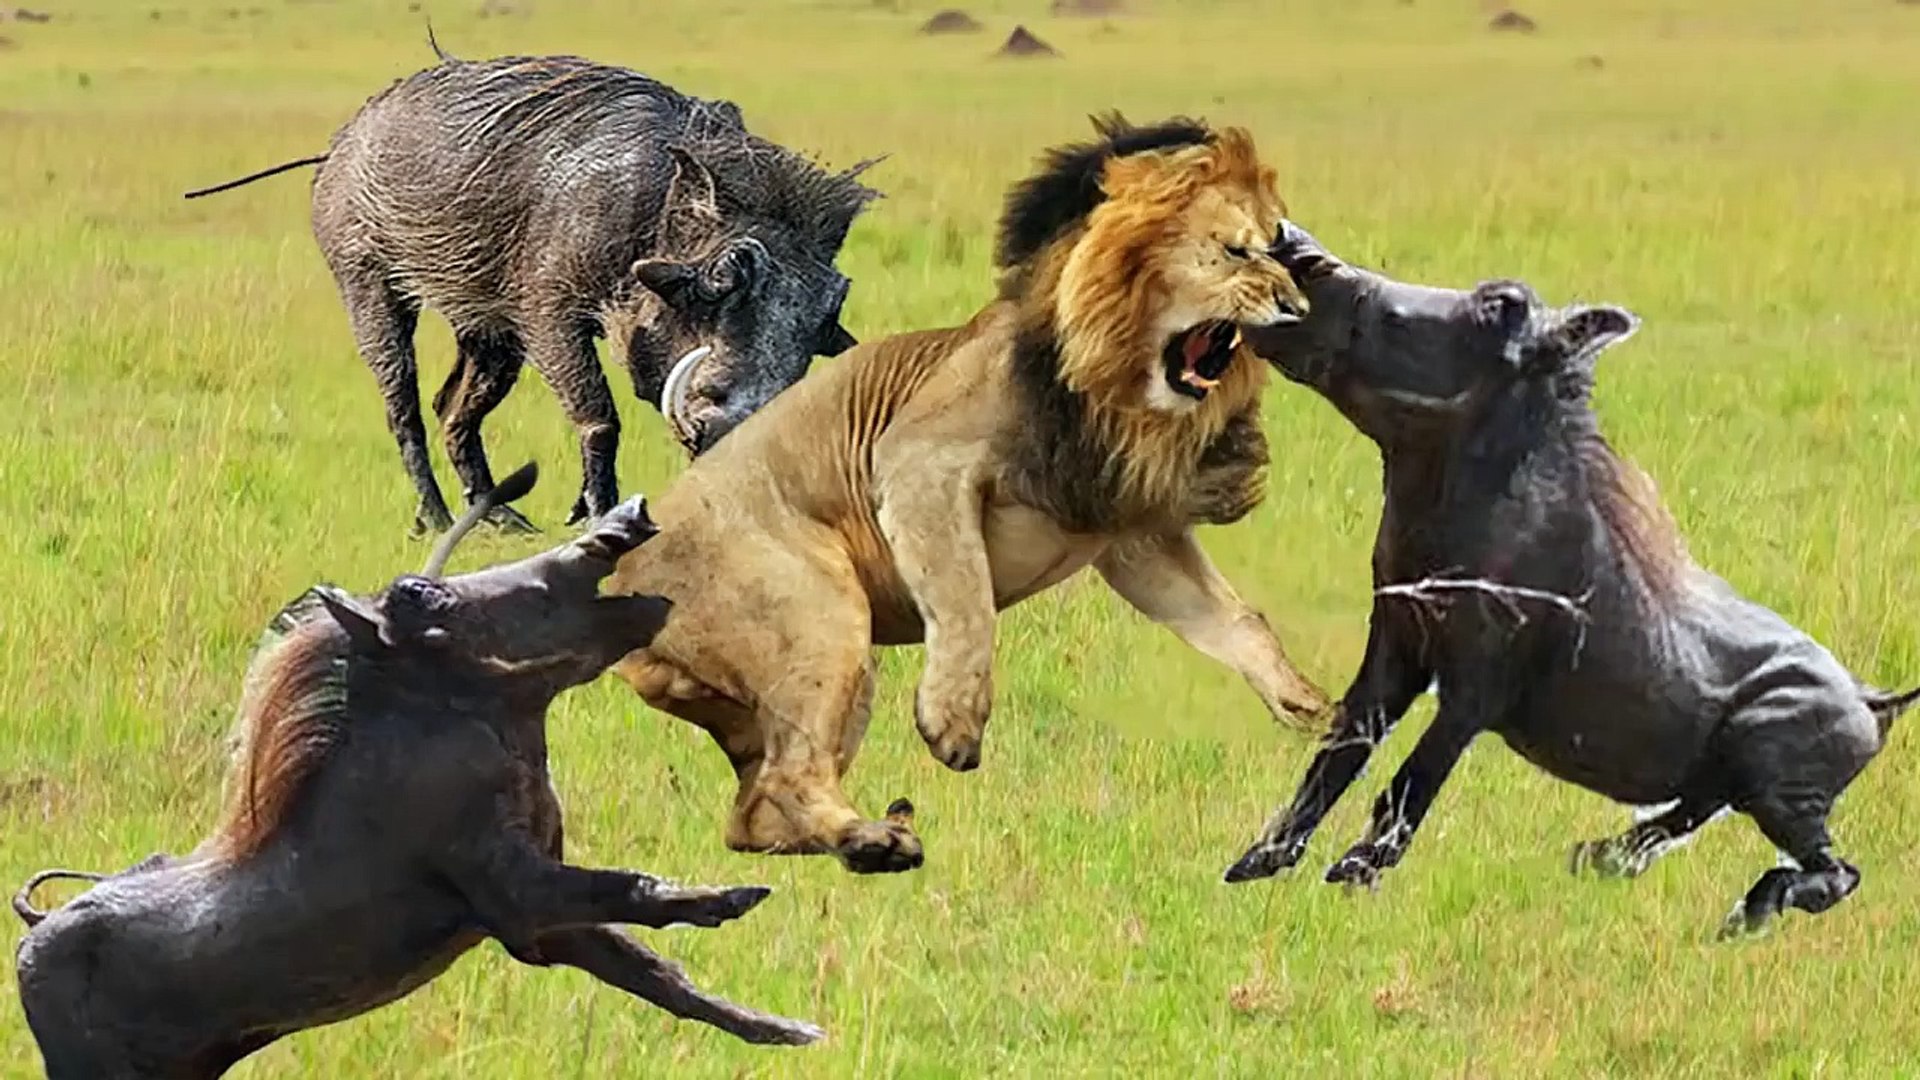 Warthog Vs Lions, Hyenas, Leopards, when rebellious creatures take what the kings think they deserve